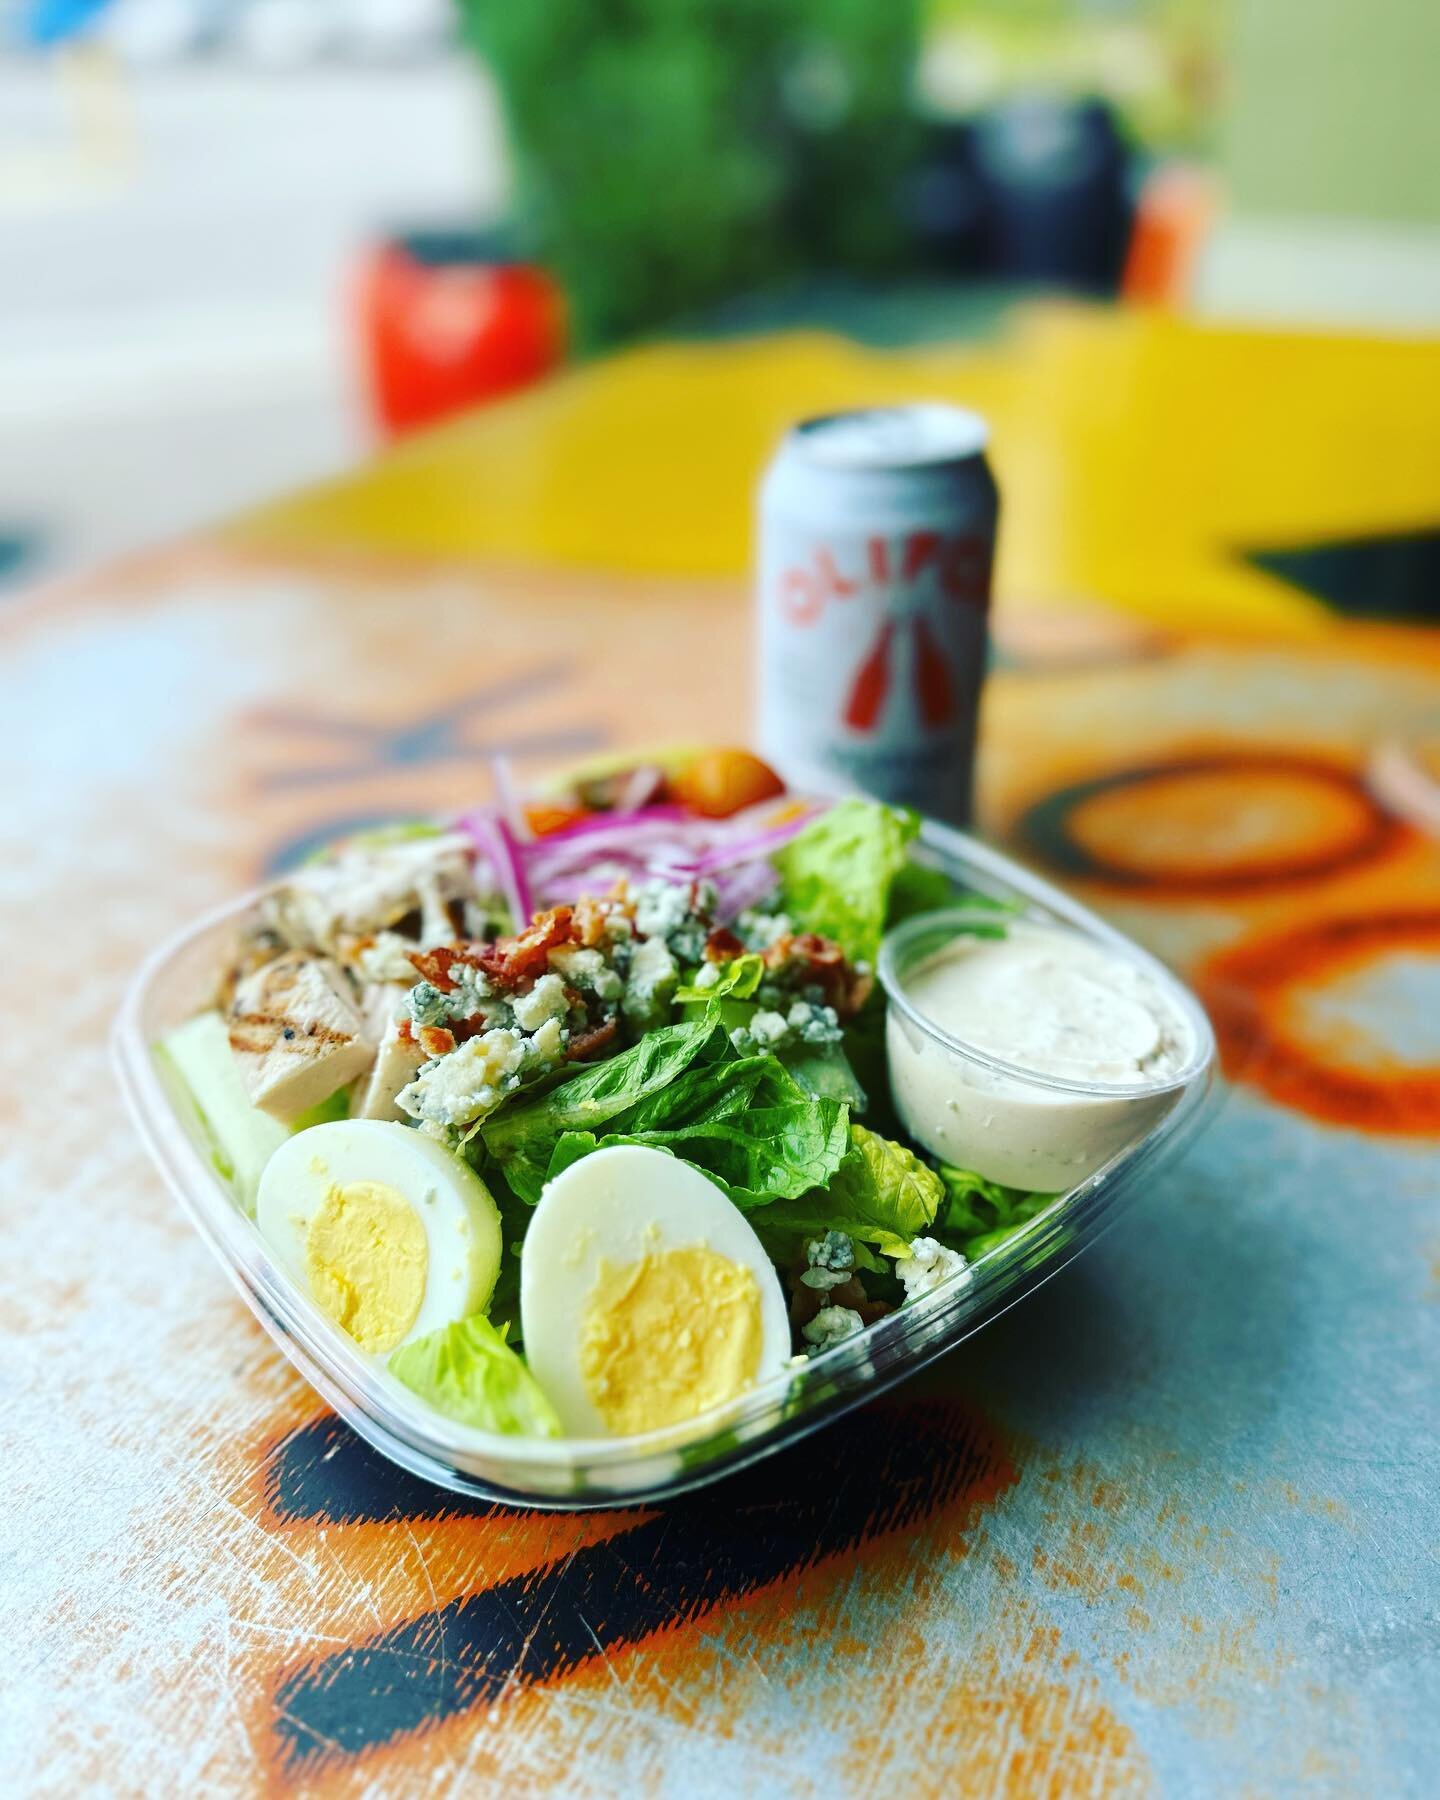 It&rsquo;s lunch time! The Cobb salad is delicious! Made fresh with organic greens and chicken! 🥗🍅🥬 
.
Grab it to go or sit at the patio 🌞
.
.
.
#patioeats #cobbsalad #ellwoodthompsons #lunchtime #olipop #eatclean #organiceats #rvahealthfood #sum